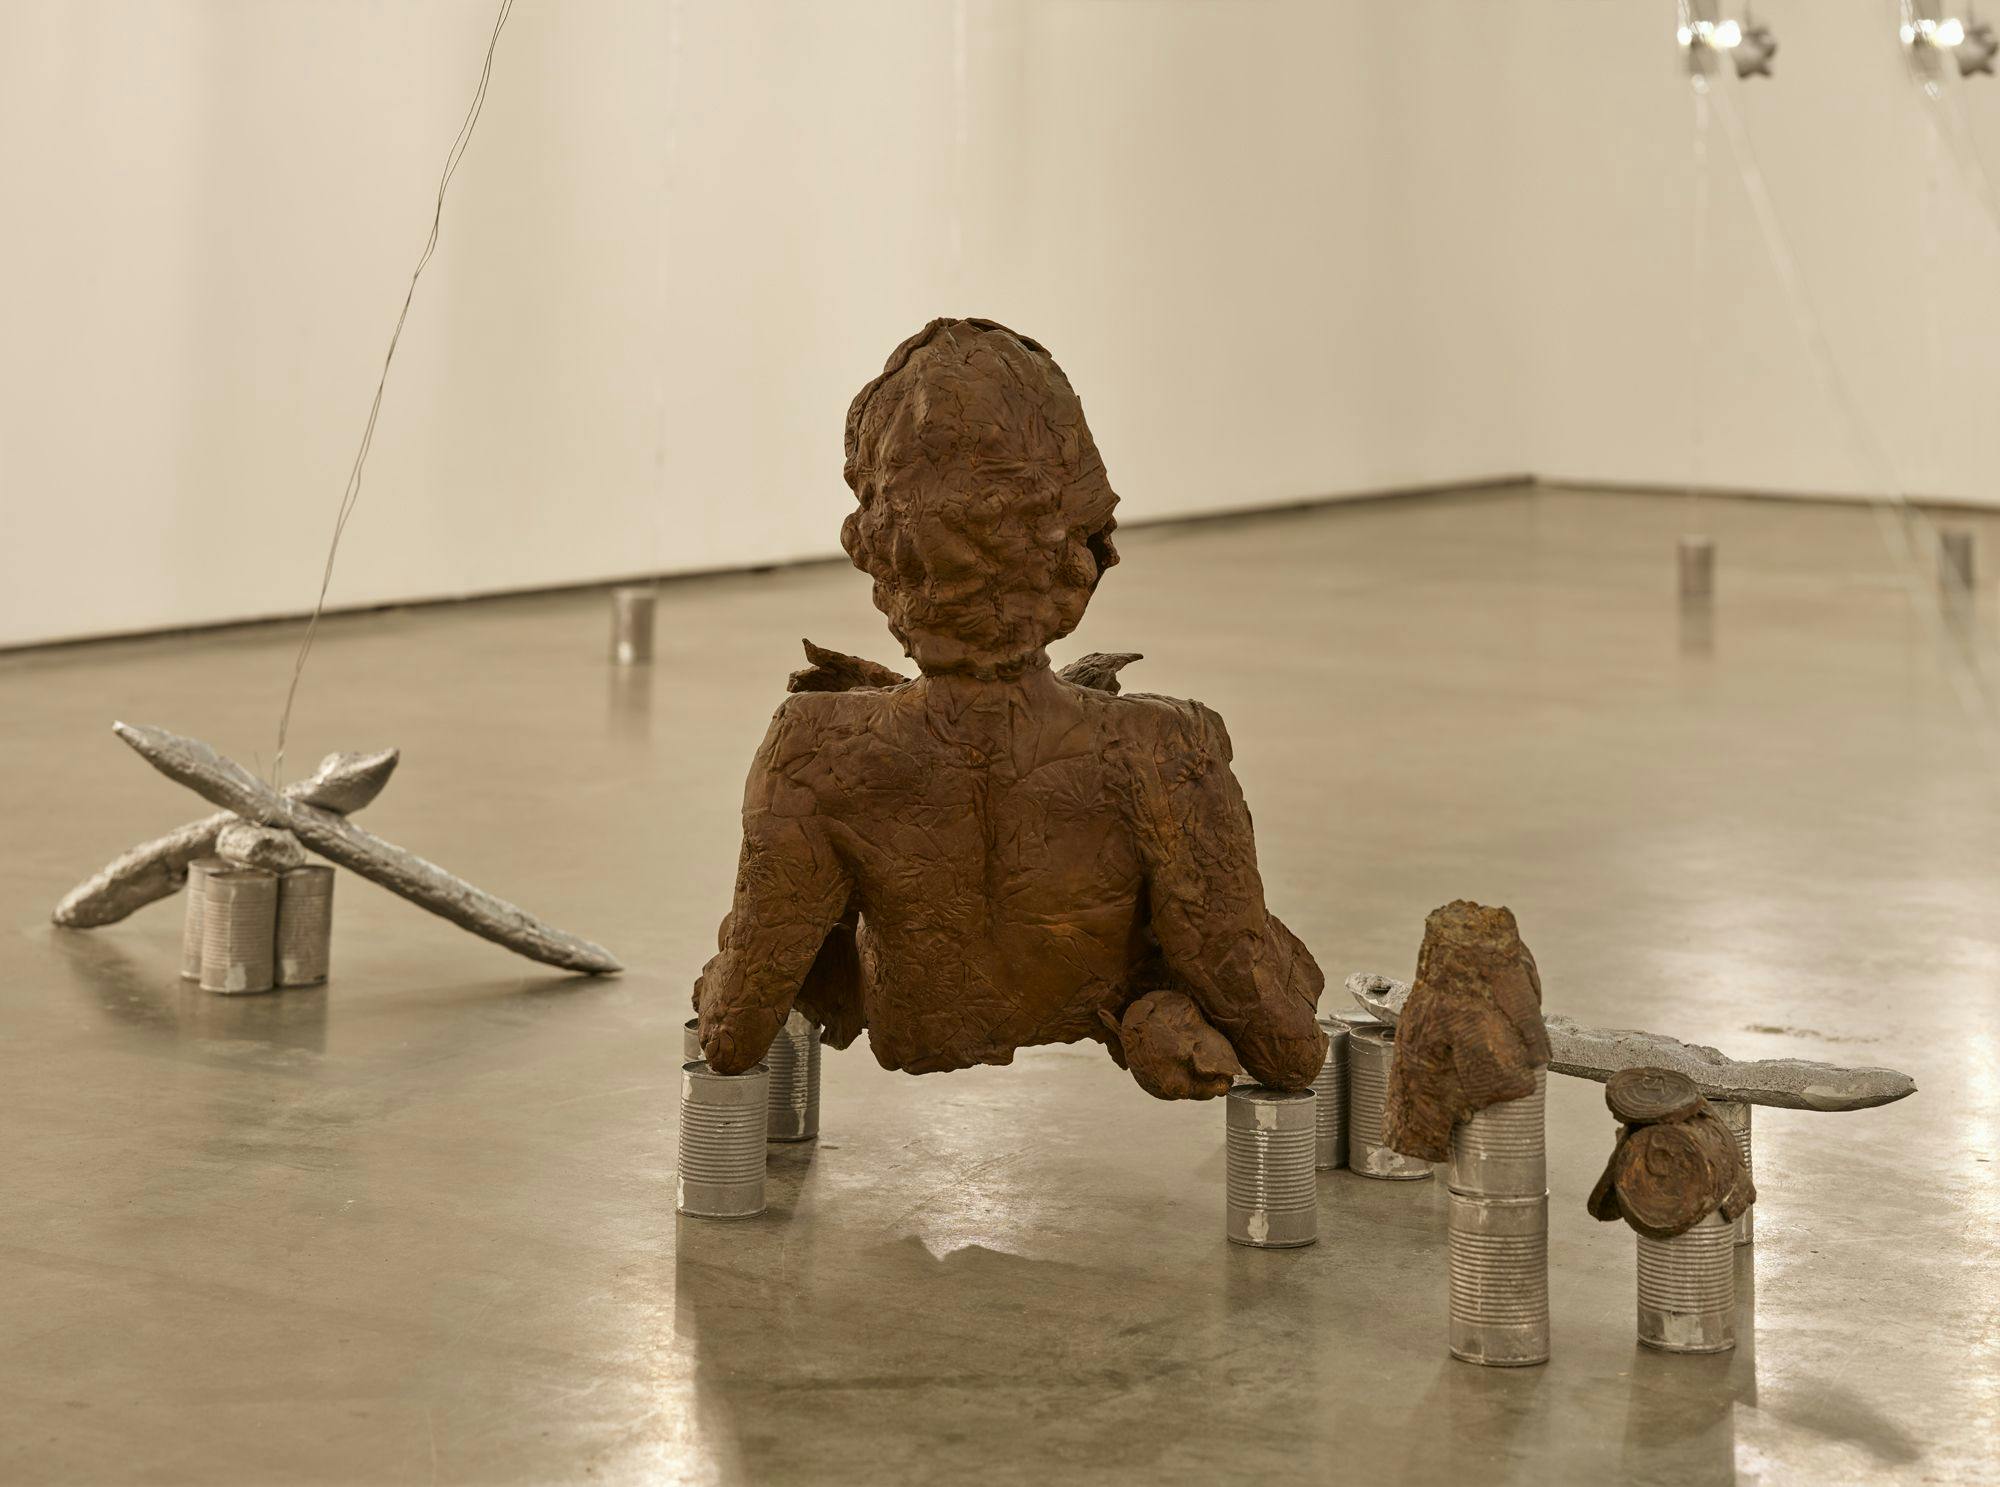 A bronze sculpture of a partial human figure sits on aluminum cans on a concrete floor. Nearby are more aluminum cans, silver baguettes, and bronze cans that appear to be melting.